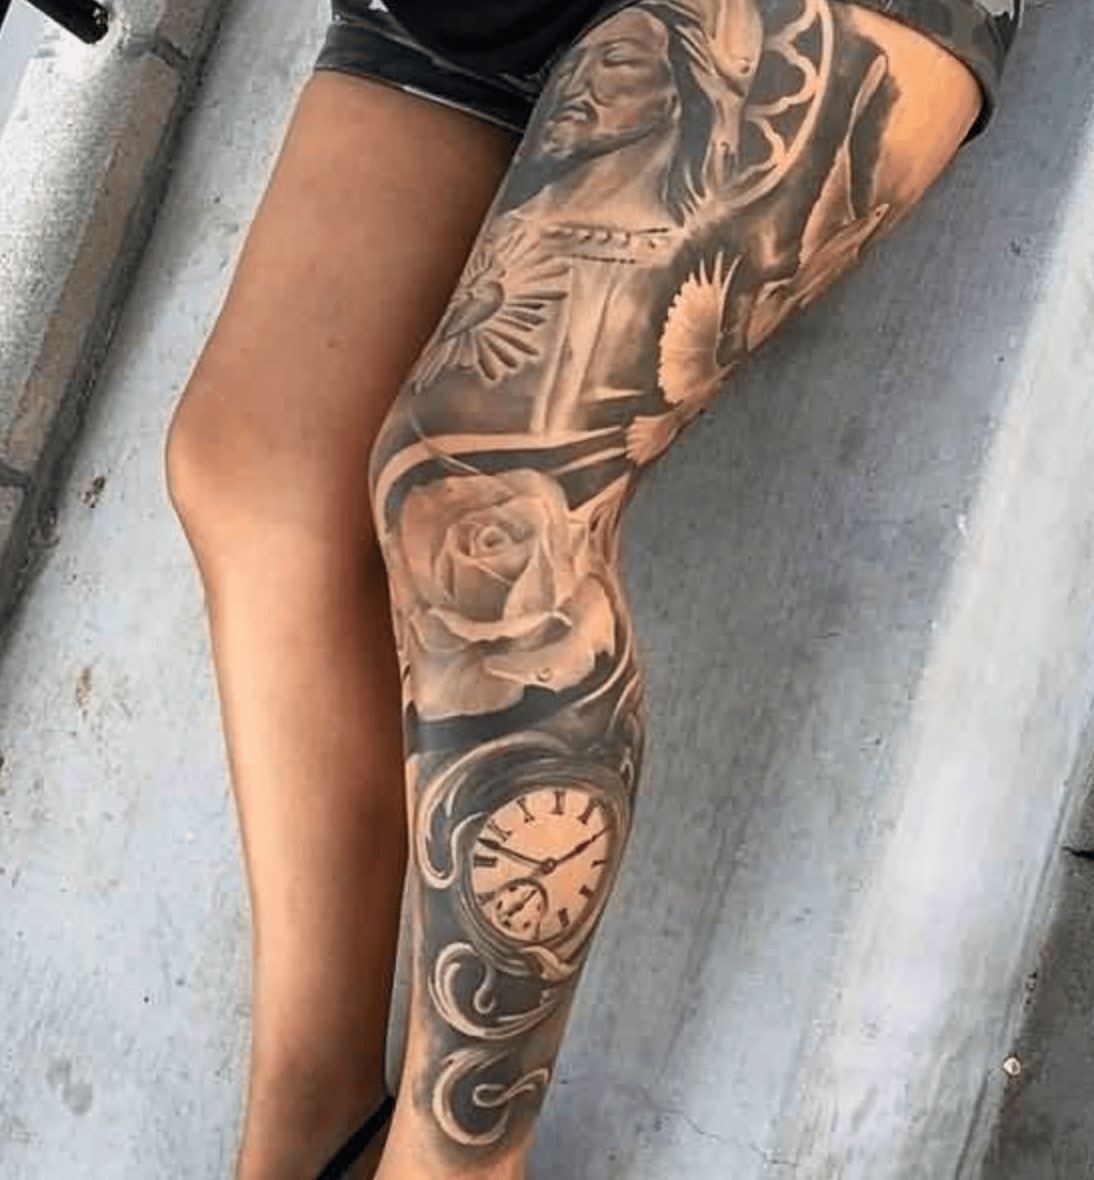 15 Tattoo ideas for legs that are classy and cool - Beanstalk Mums